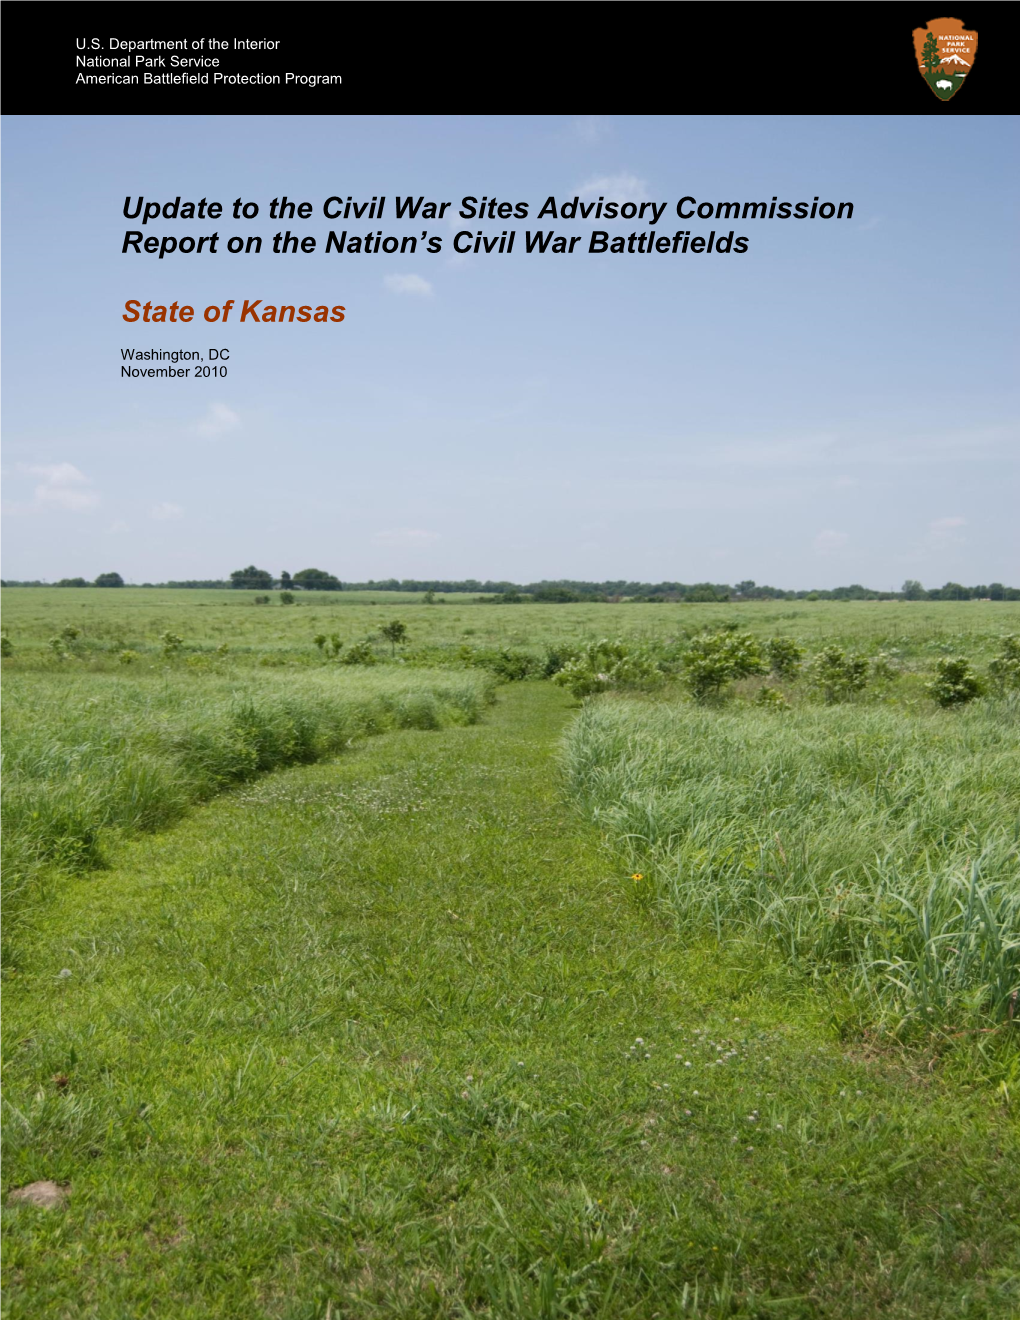 Update to the Civil War Sites Advisory Commission Report on the Nation's Civil War Battlefields State of Kansas